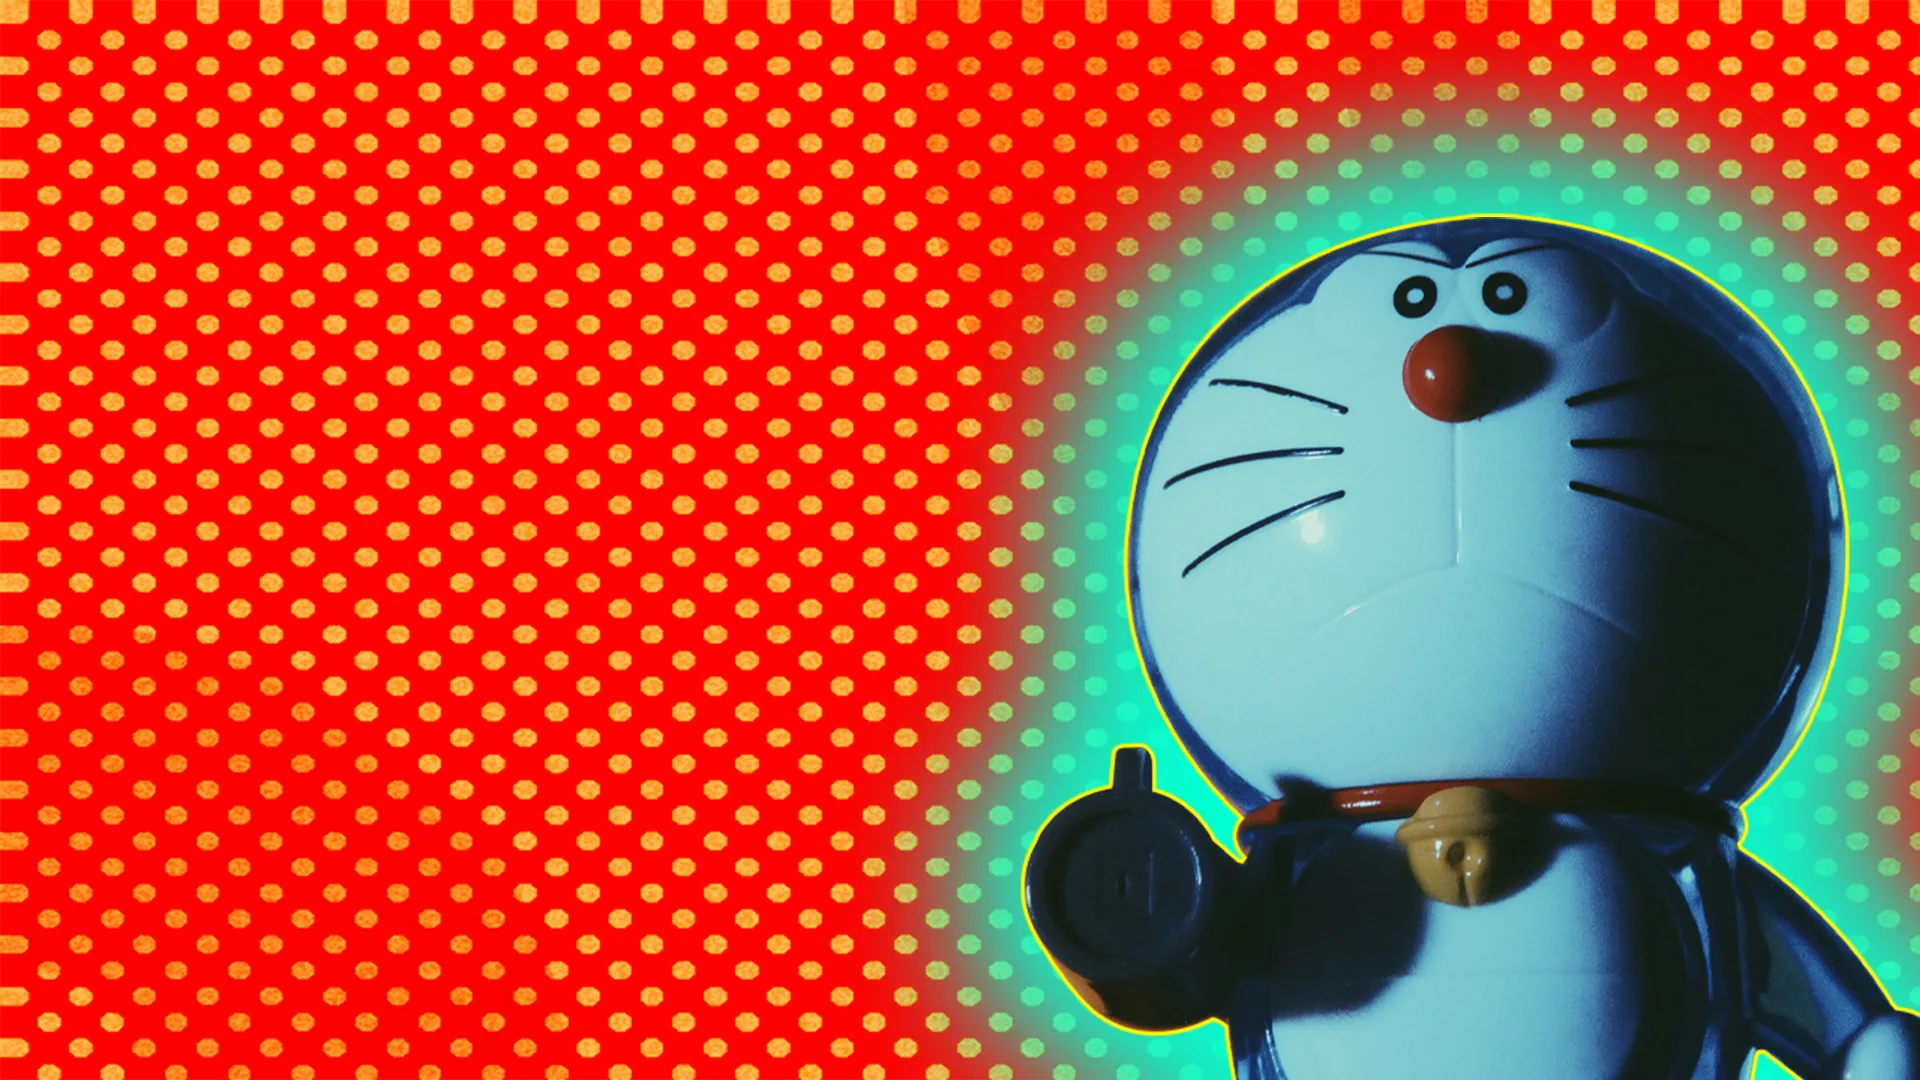 Doraemon, manga character, outlined by red halo effect on red-dotted background.